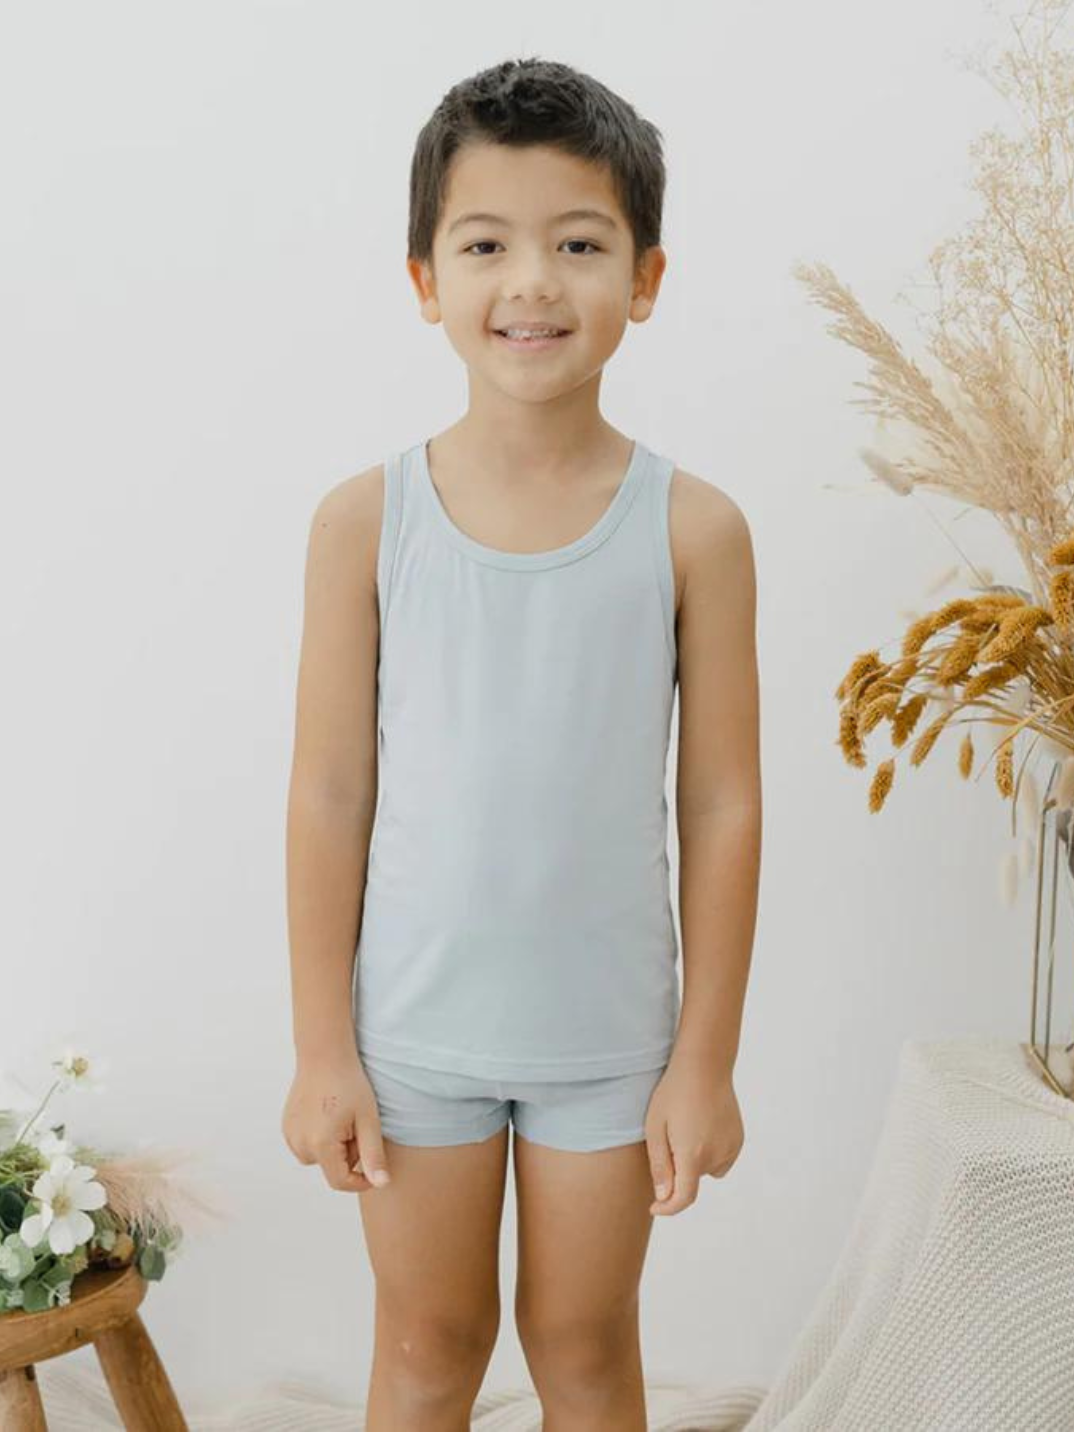 These tank tops are super soft and gentle on your little ones' skin. Designed with a loose, unisex fit for play, movement and a comfy night's rest. Wear the breathable layer under garments for day or snooze in the ultimate comfort. Made with modal interwoven with eco-soft technology. Comes with: 2x blue tank tops.